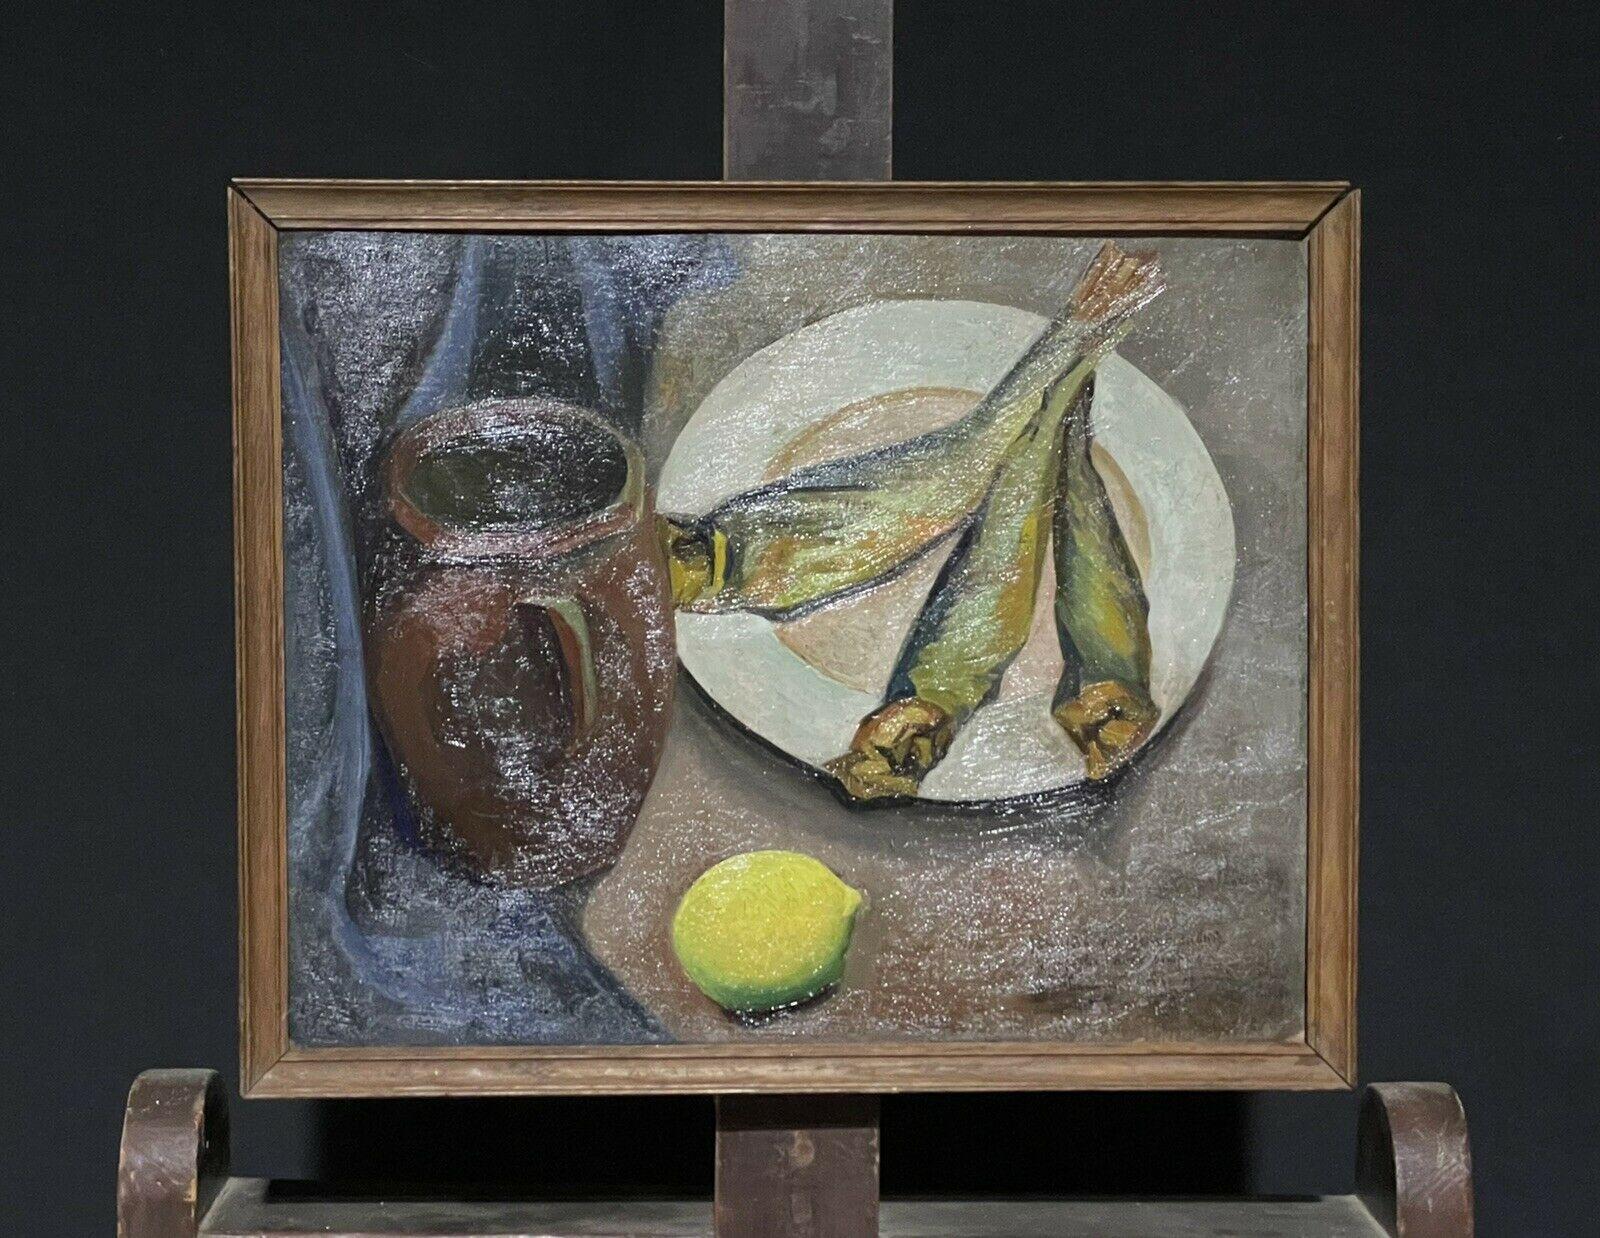 MID 20TH CENTURY FRENCH MODERNIST STILL LIFE - FISH LEMON KITCHEN TABLE - Painting by Unknown